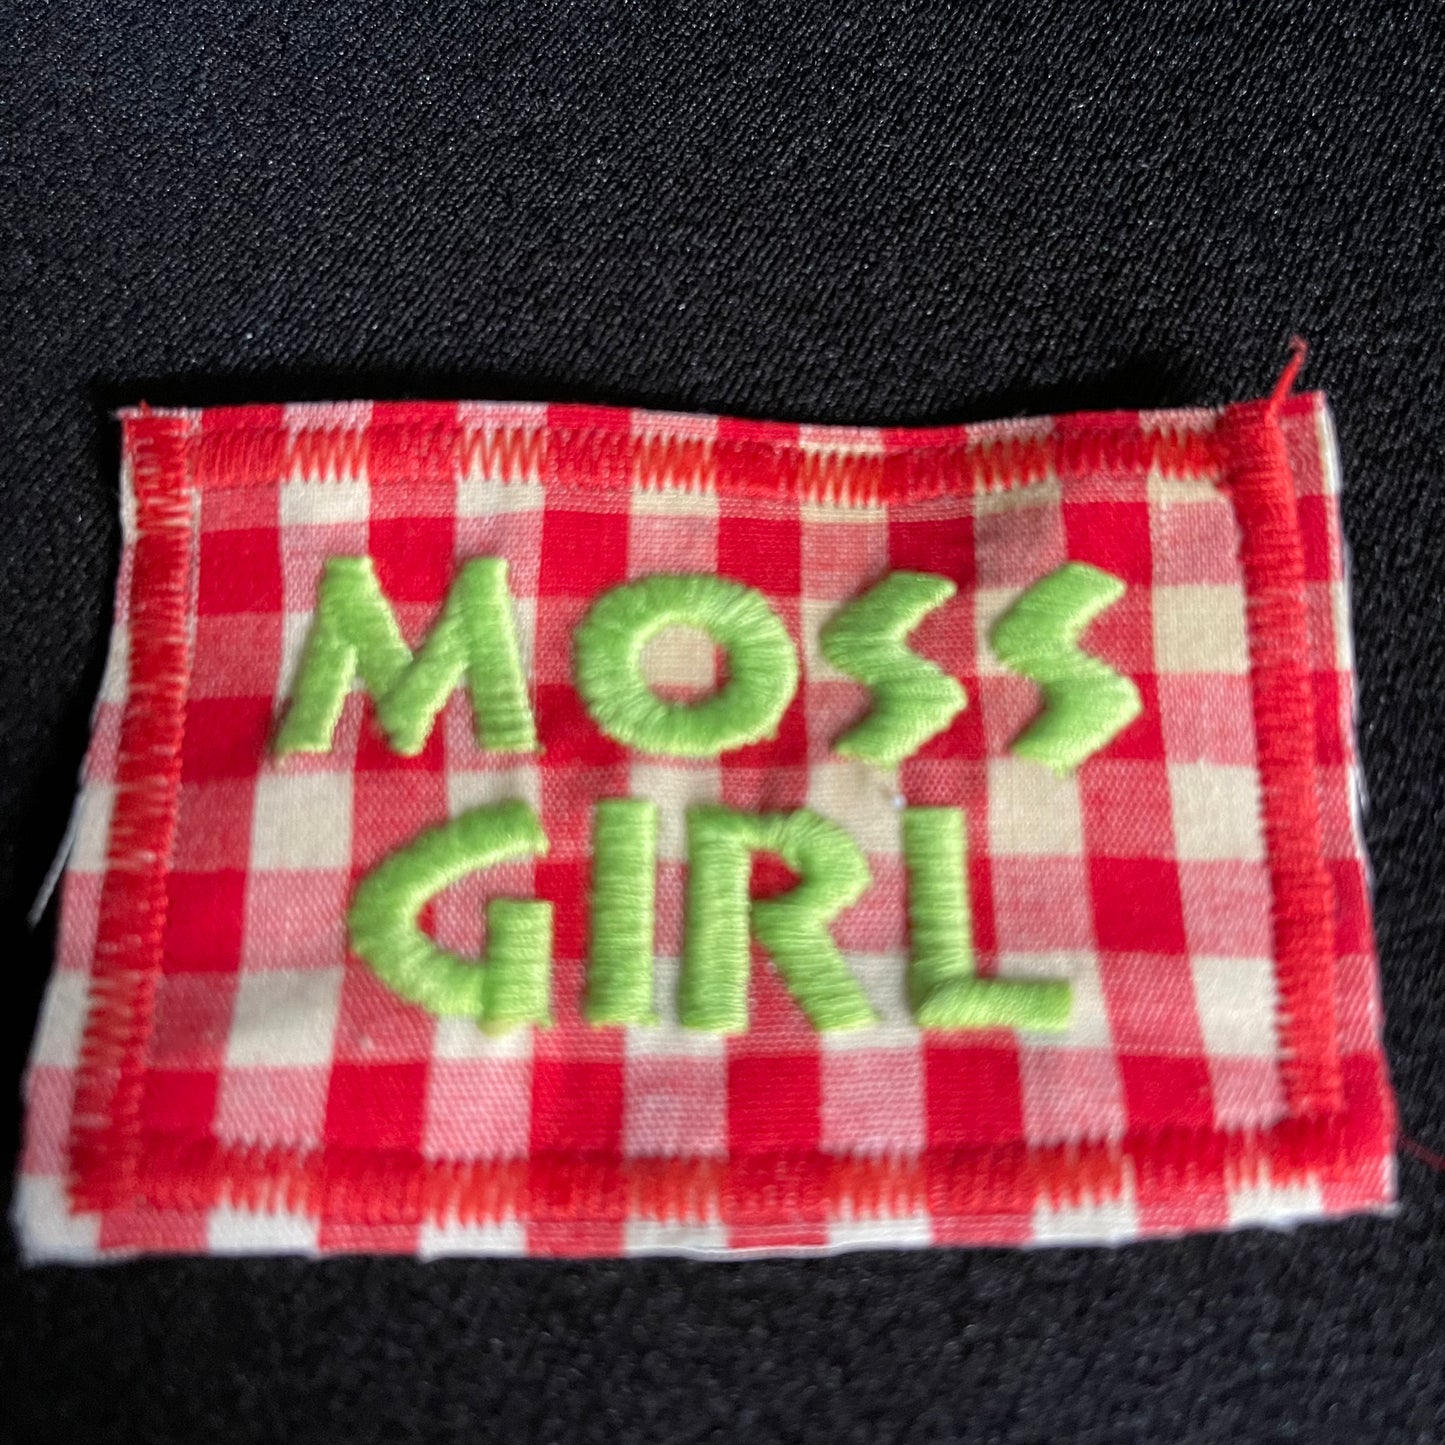 Moss Girl Patch